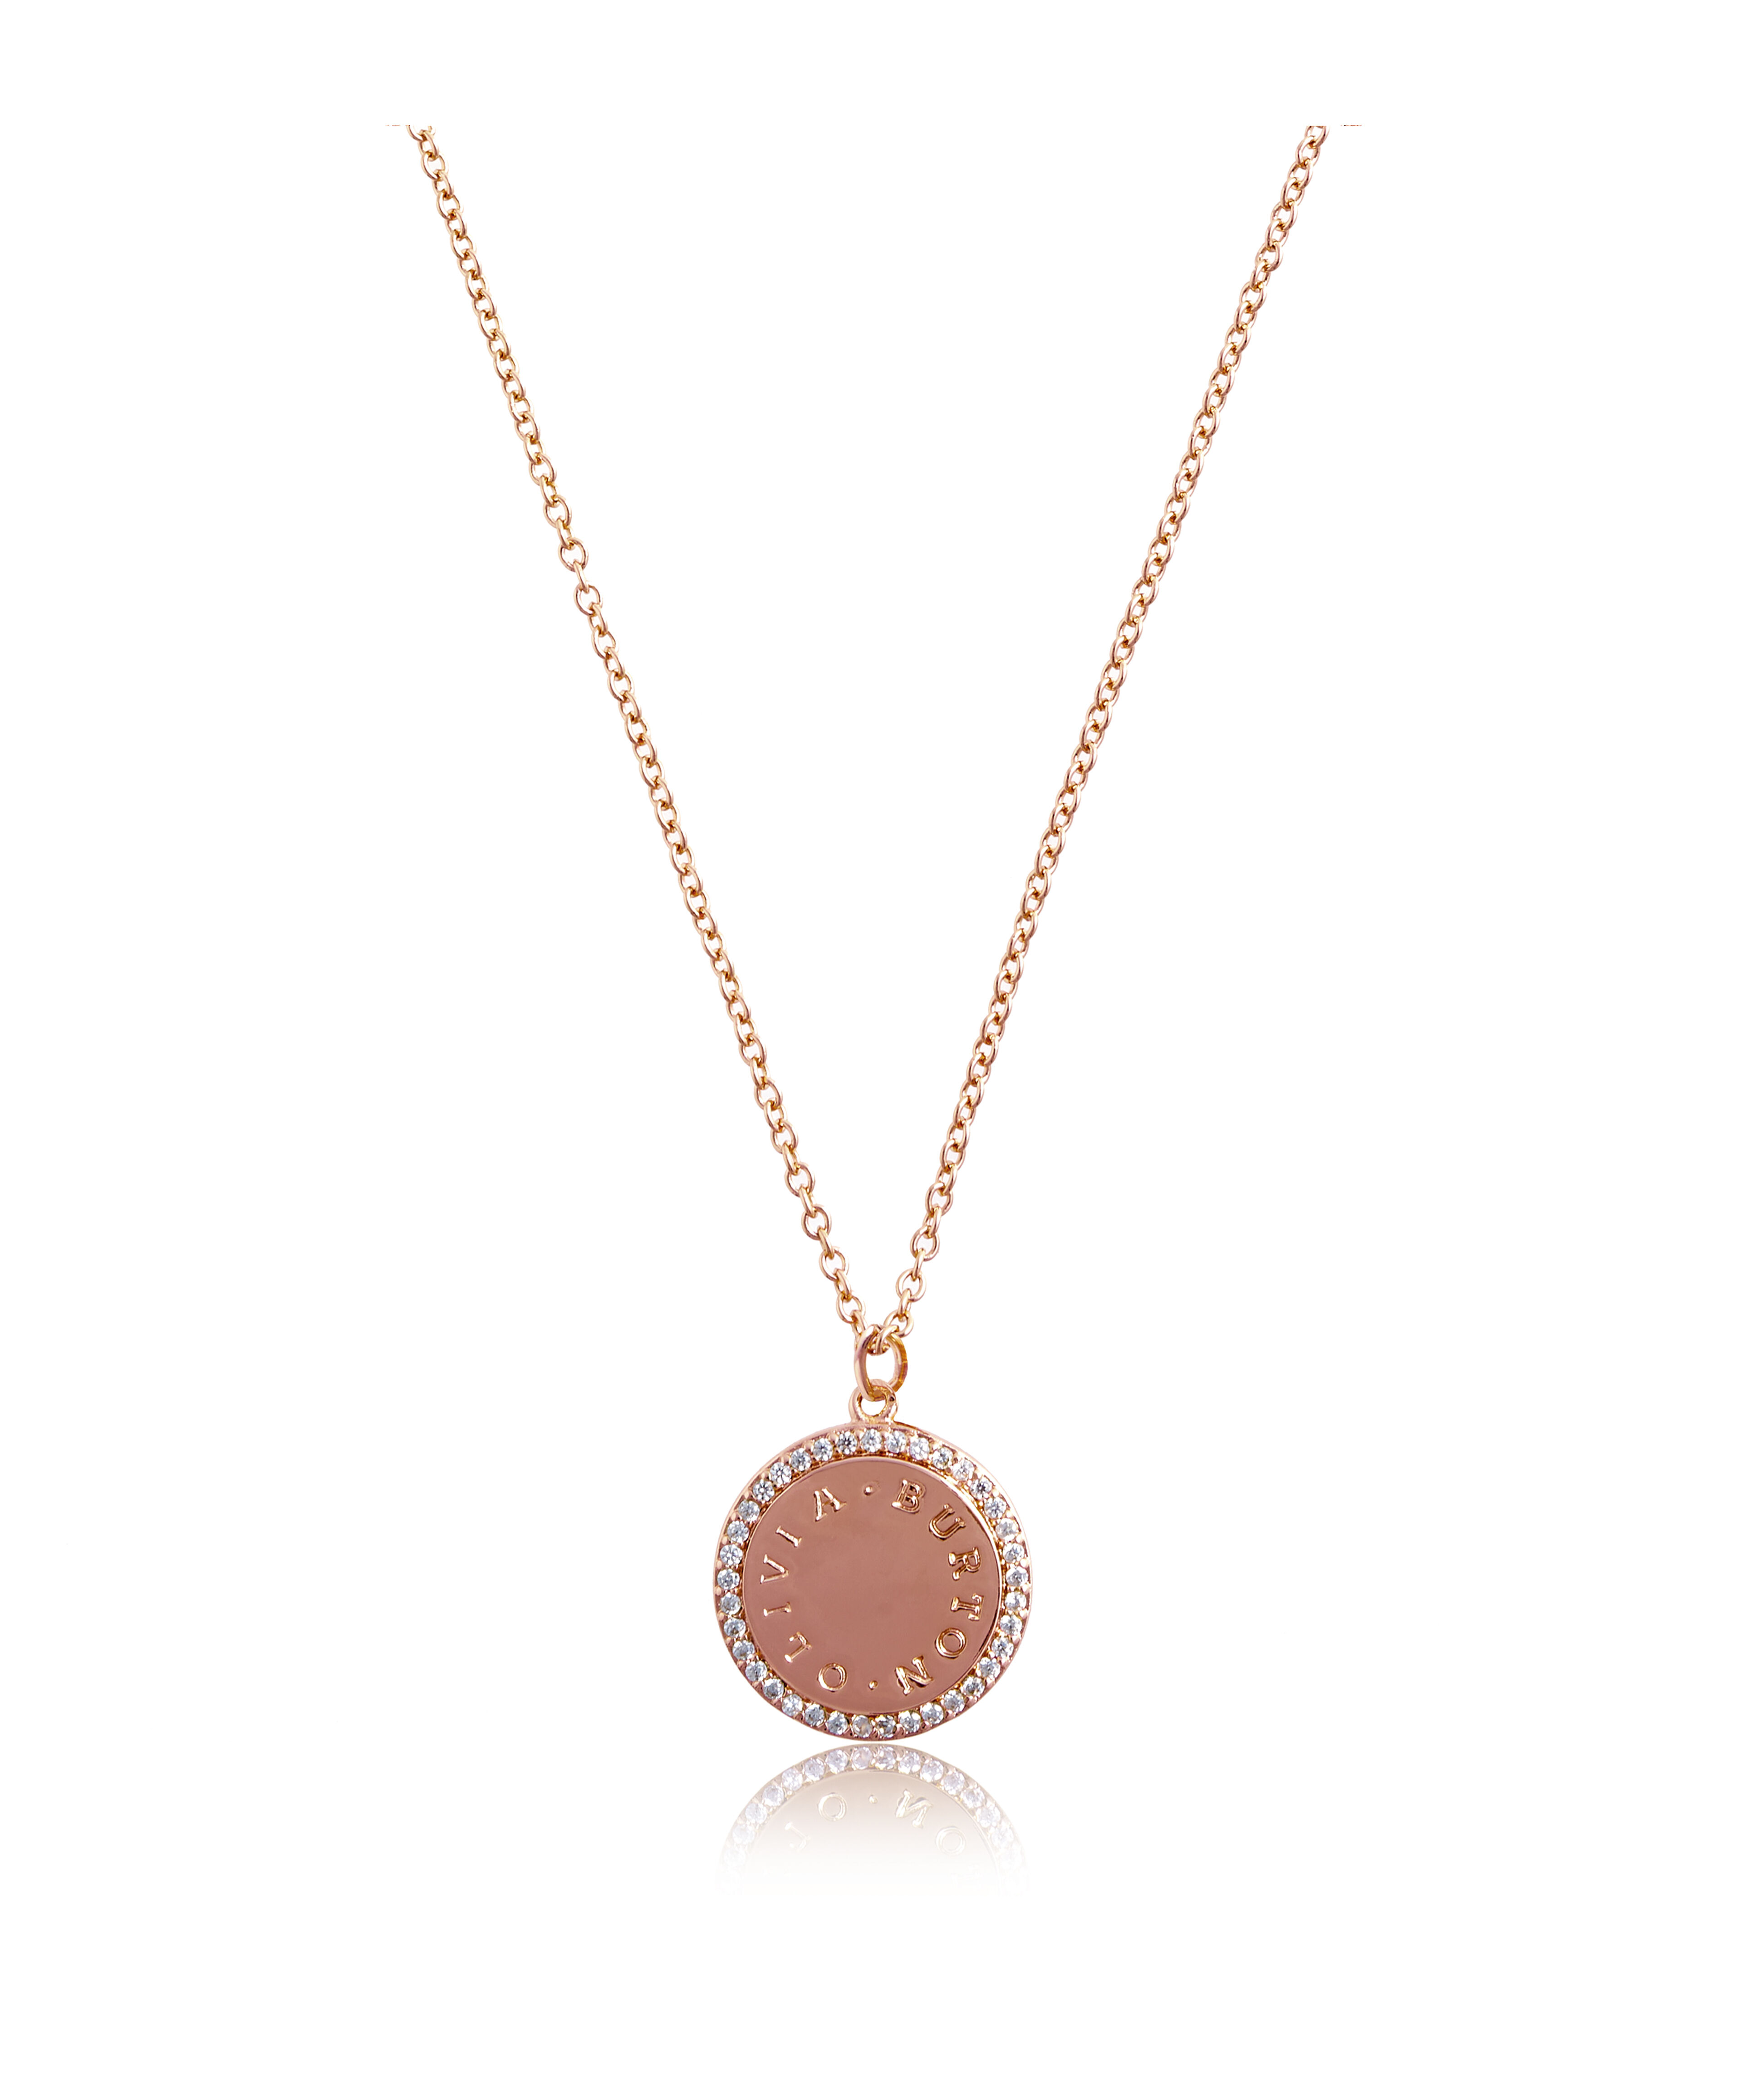 REVERSIBLE RADIANCE NECKLACE - Sparkstone